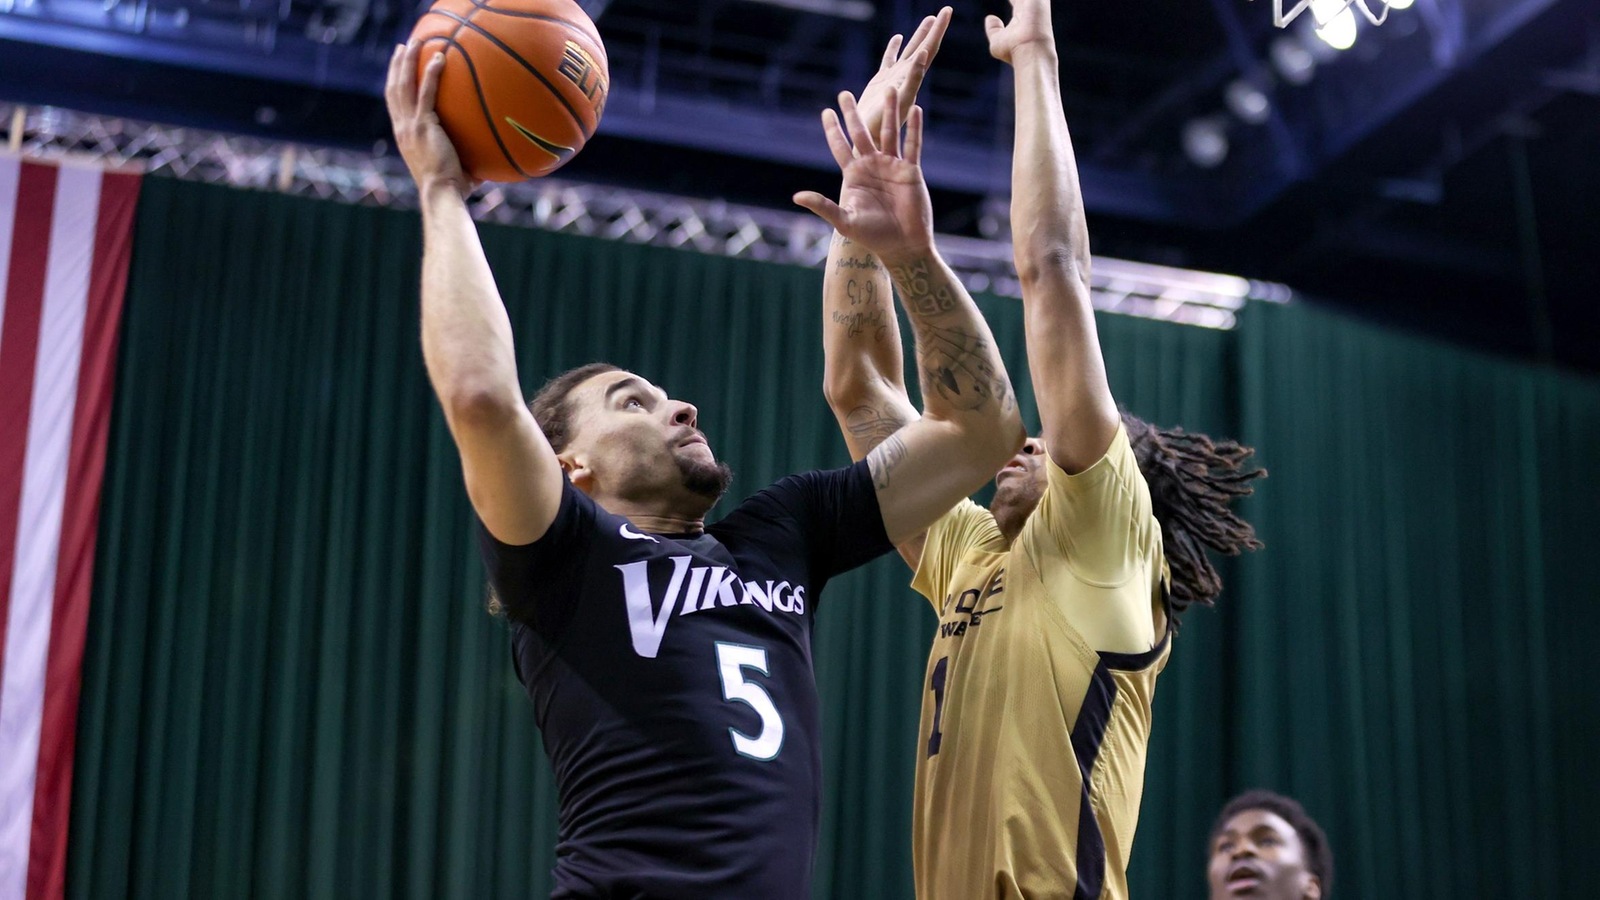 Cleveland State Men’s Basketball Remains Perfect In #HLMBB Play With 65-58 Victory Over Purdue Fort Wayne